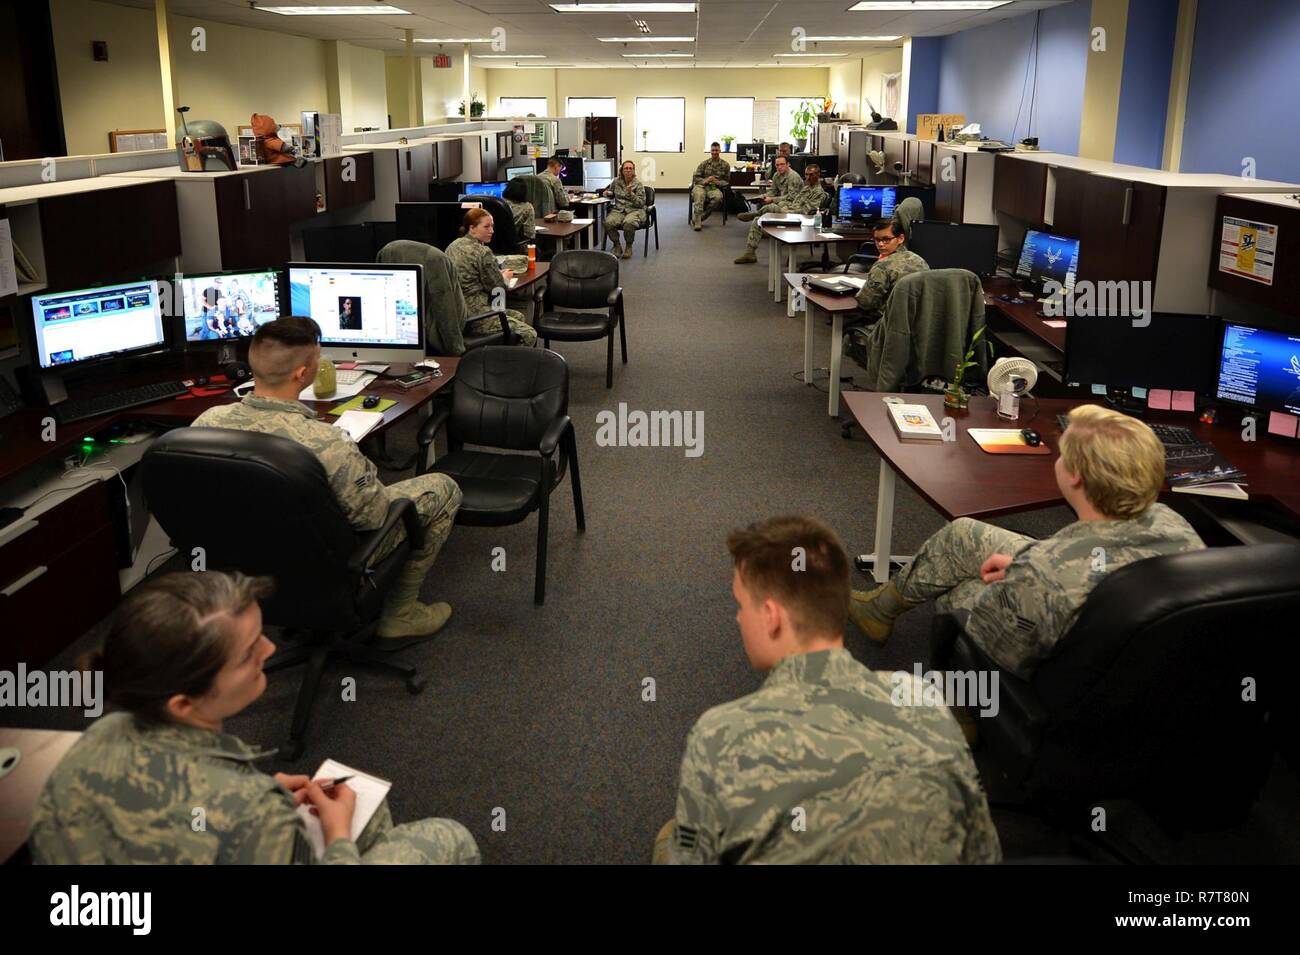 U.S. Airmen assigned to the 20th Fighter Wing (FW) Public Affairs (PA) office meet for a productivity meeting at Shaw Air Force Base, S.C., March 21, 2017. Photojournalists assigned to the 20th FW PA office are tasked with documenting base operations, as well as taking and distributing official studio and passport photos for Airmen who are applying for award packages and preparing for deployments and permanent change of stations. Stock Photo